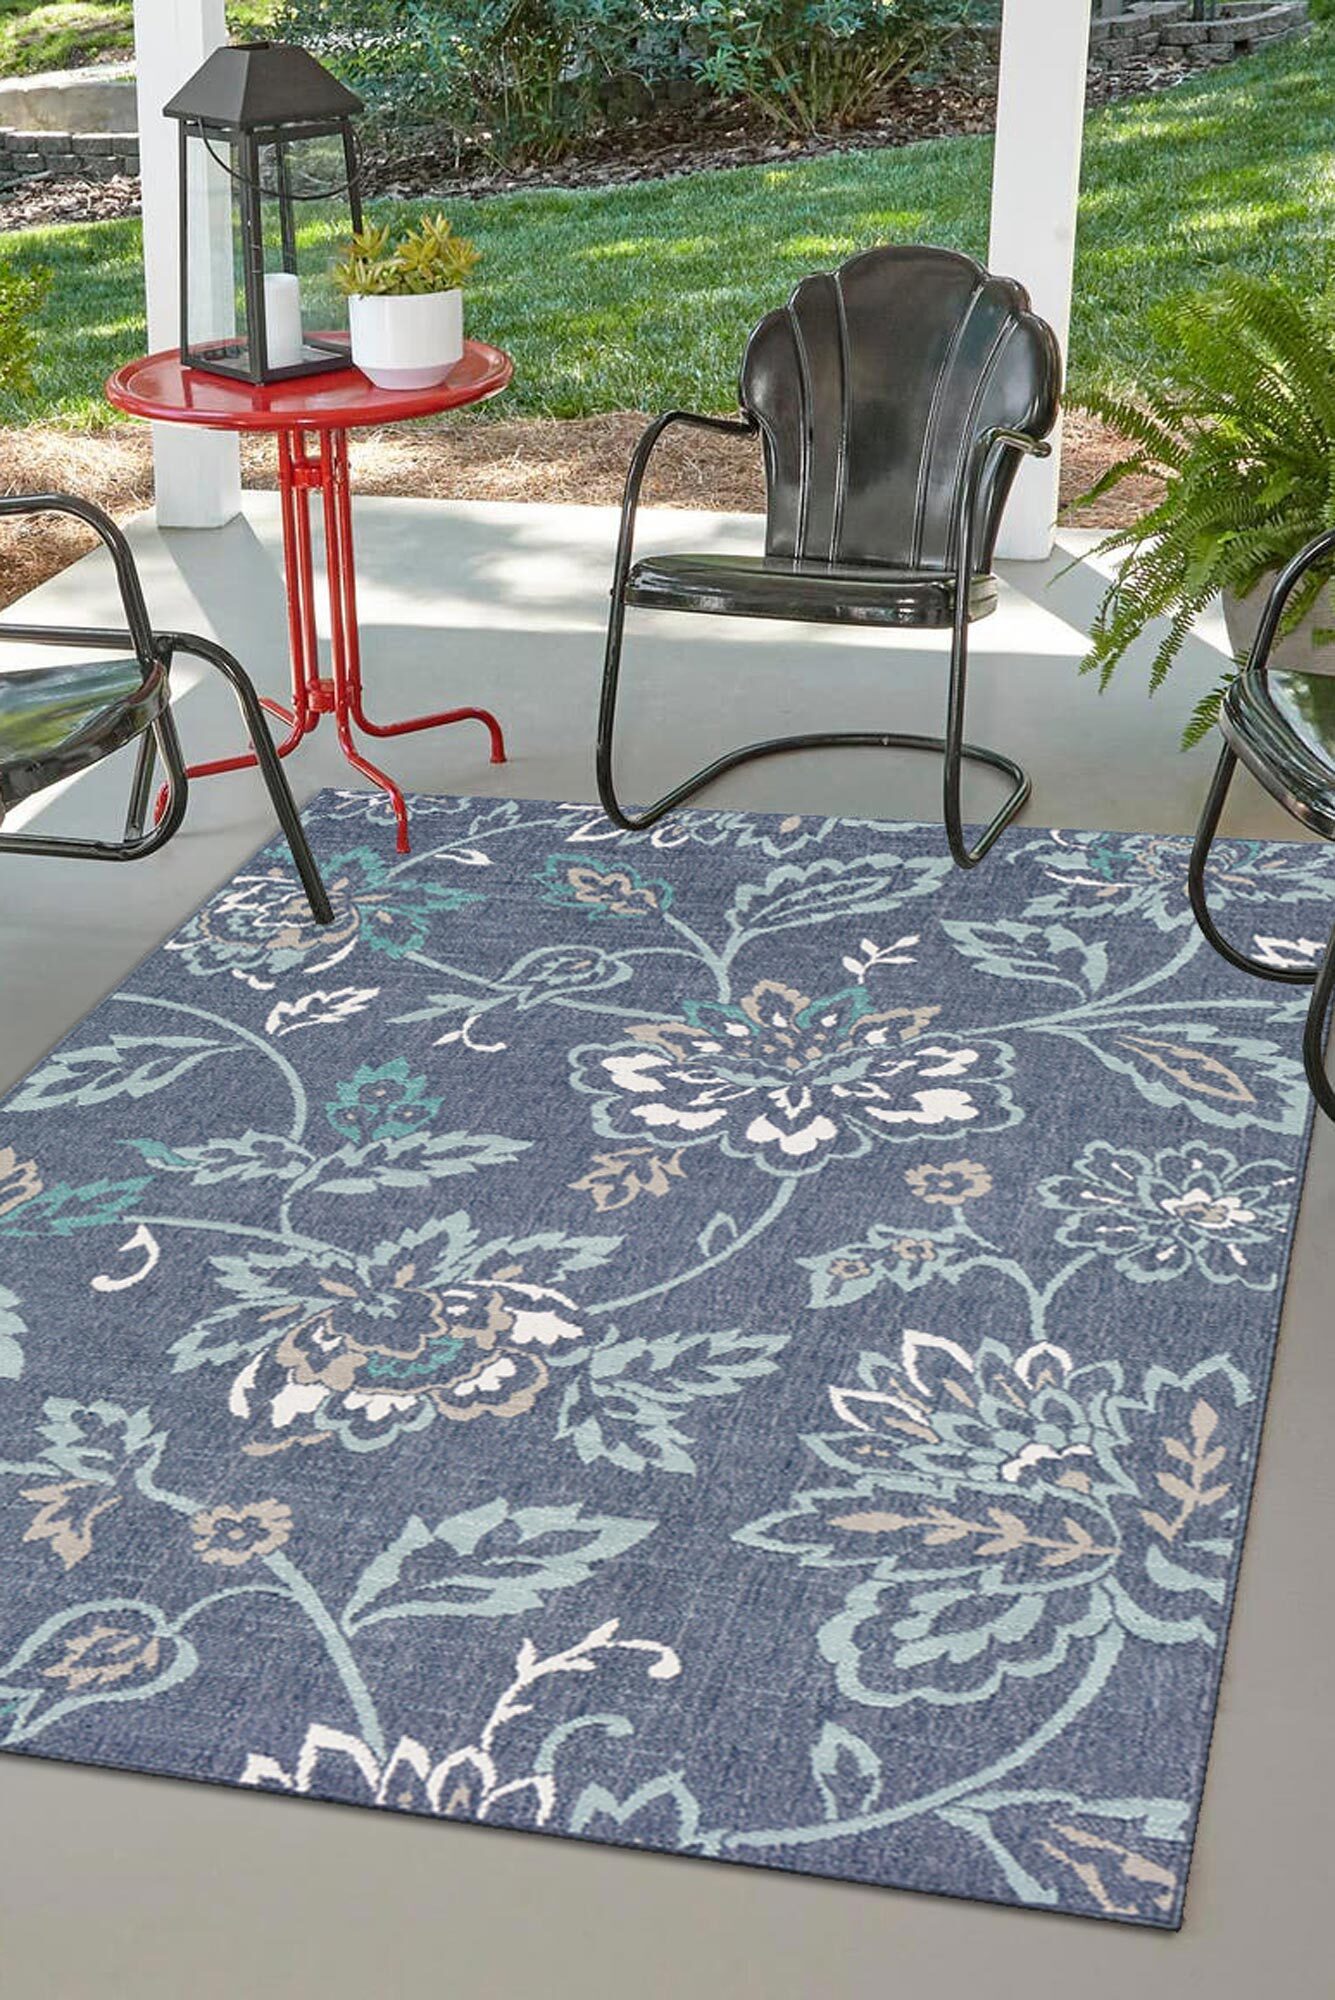 Ambient Blue Floral Outdoor Rug(Size 170 x 120cm)